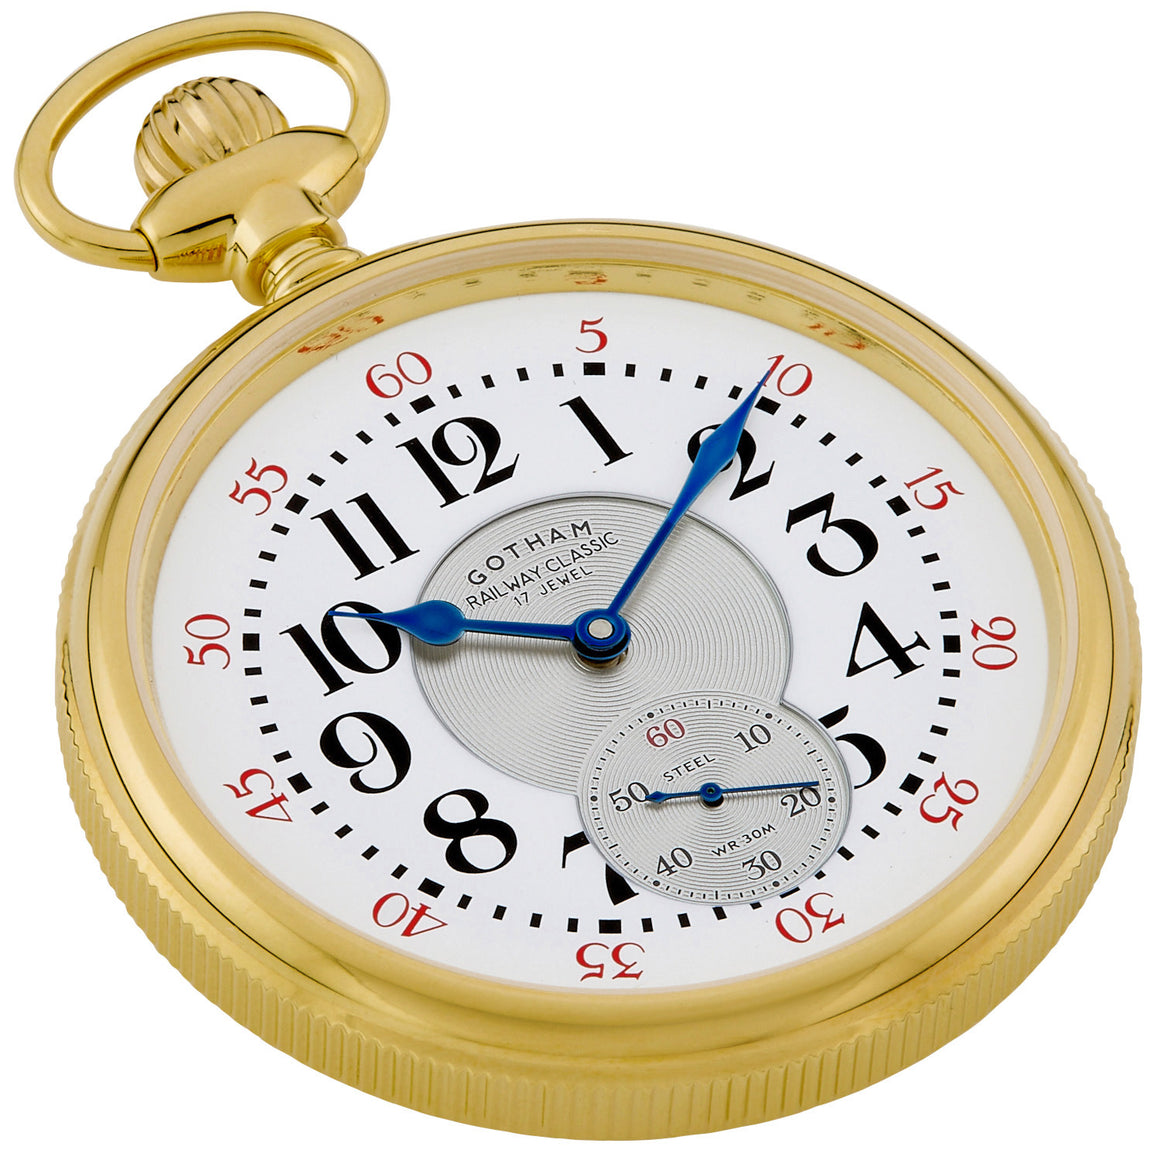 Gotham Men's Gold Plated Stainless Steel Mechanical Hand Wind Railway Classic Nostalgia Series Pocket Watch # GWC14117G